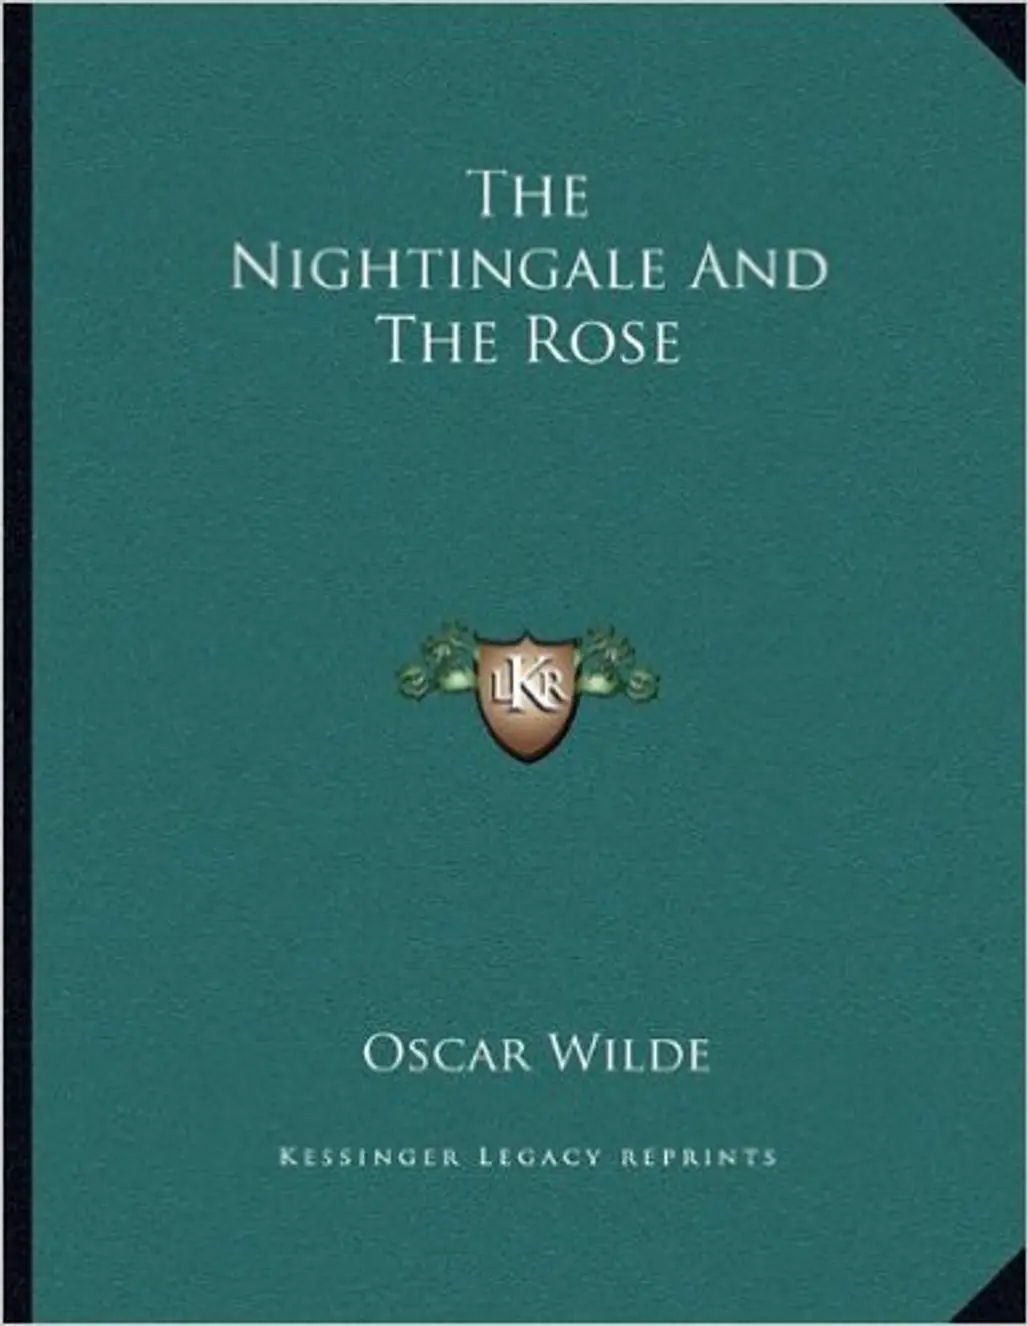 The Nightingale and the Rose (Oscar Wilde)